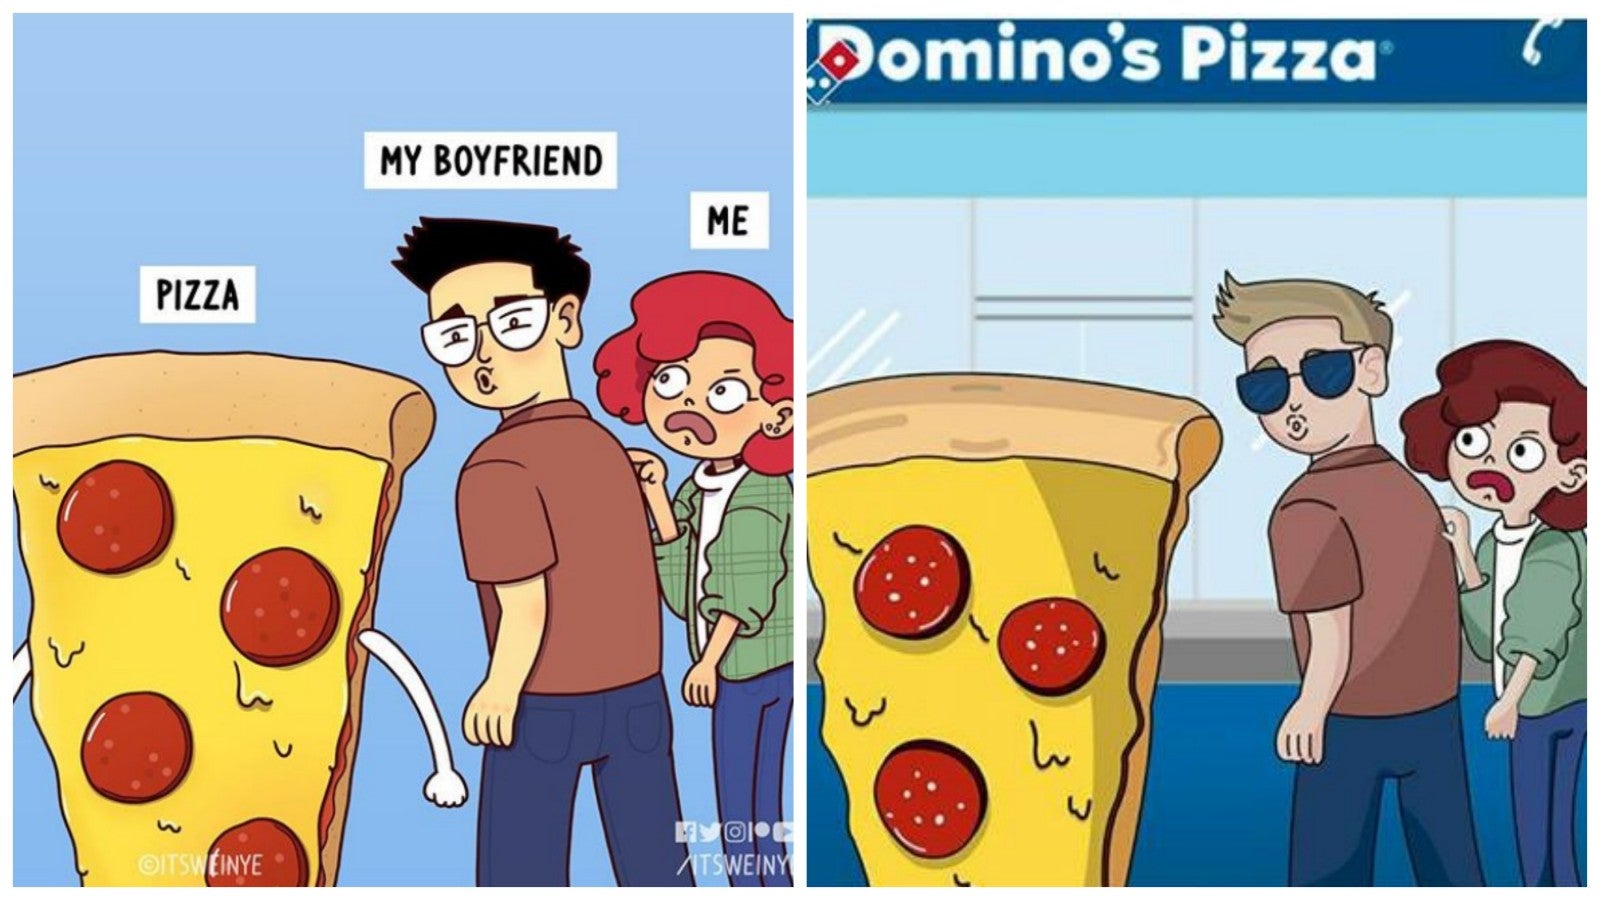 Malaysian Artist Calls Out Domino's Chile For Stealing Her Artwork - WORLD OF BUZZ 1